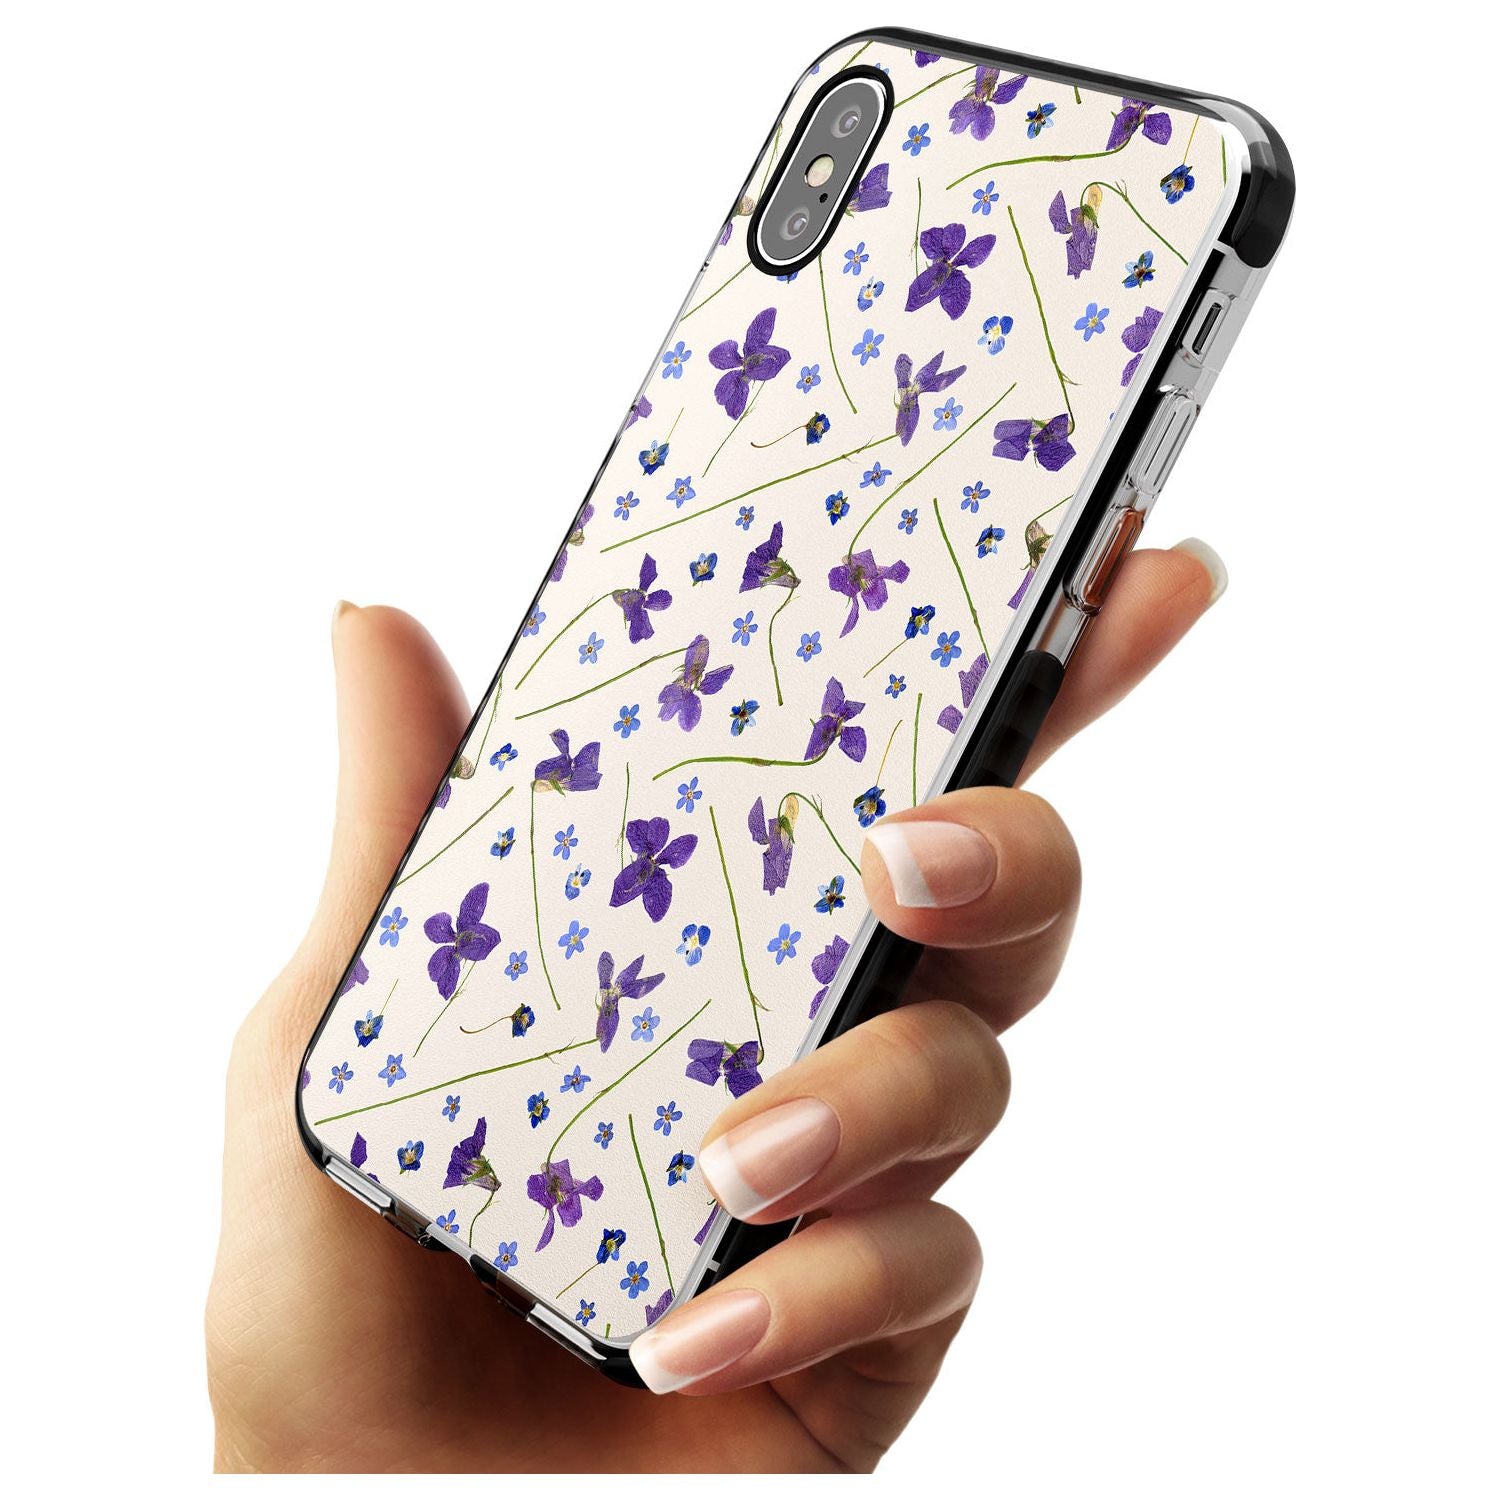 Violet Floral Pattern Design - Cream Black Impact Phone Case for iPhone X XS Max XR